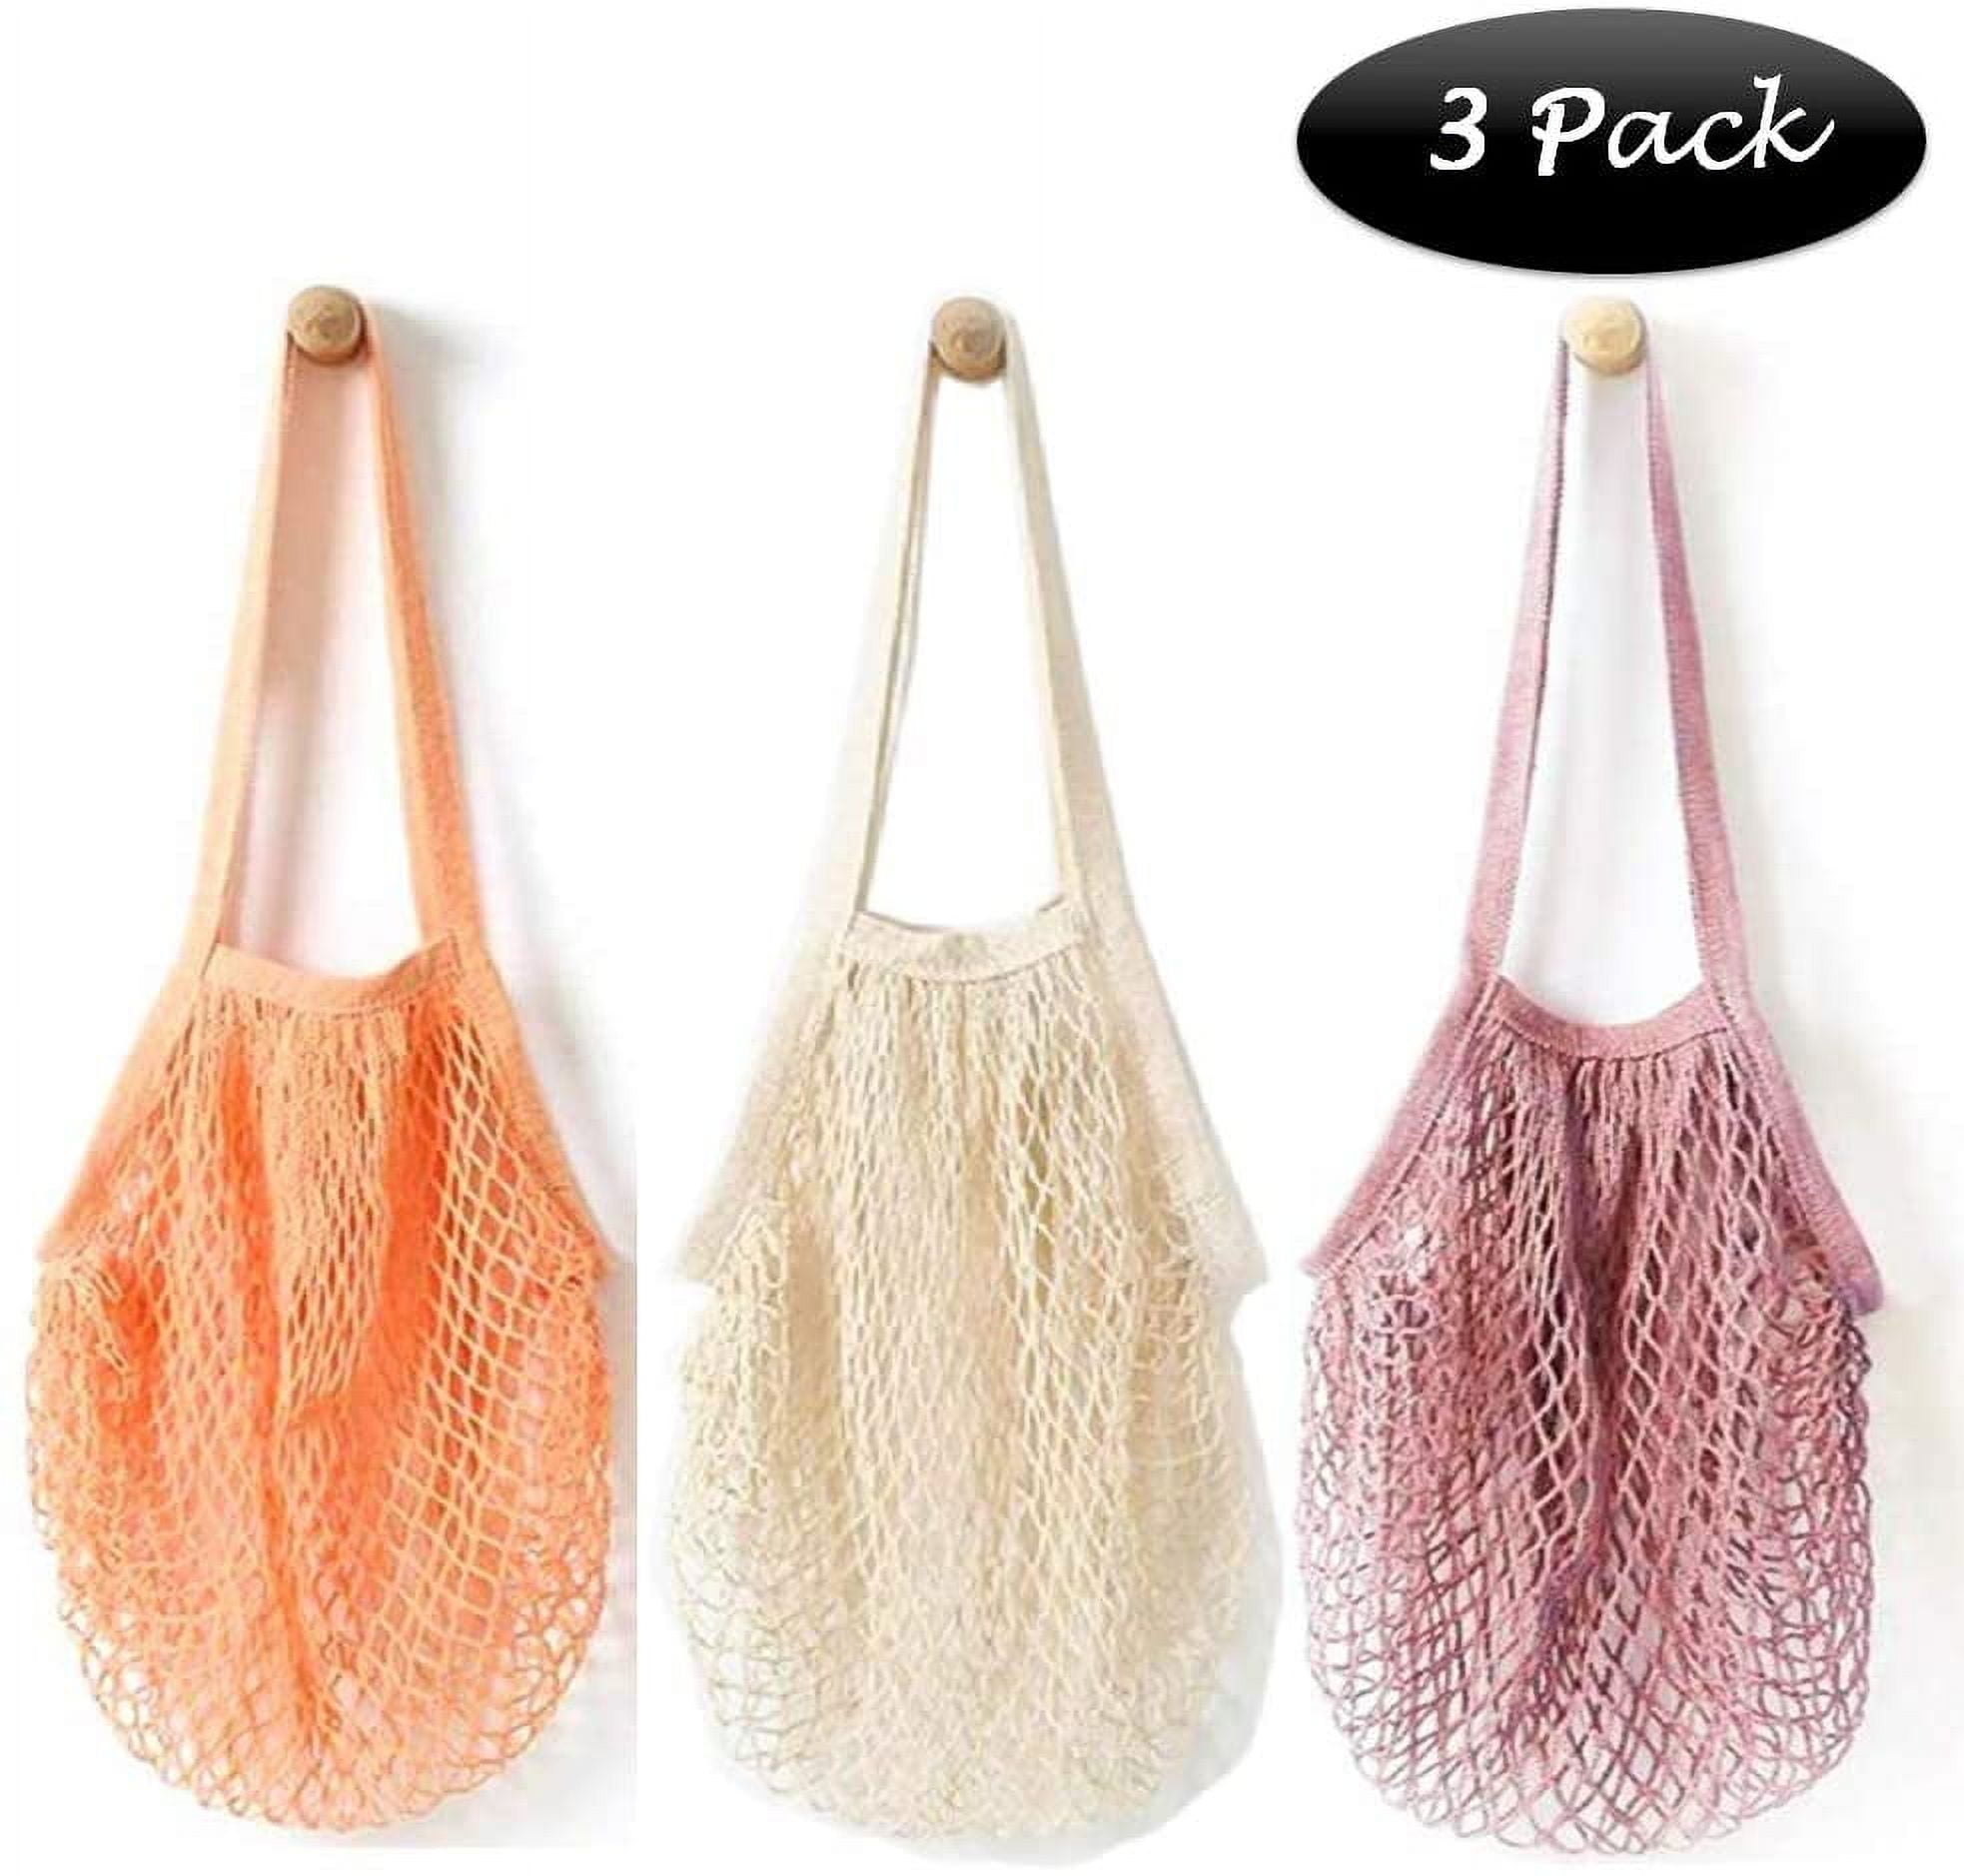 Mesh Bags Reusable Cotton Mesh Grocery Bags - 100% Cotton | Net Cotton  String | Shopping Bag – Eco Market Bag - Tote Bag Vegetable - Pack of 3